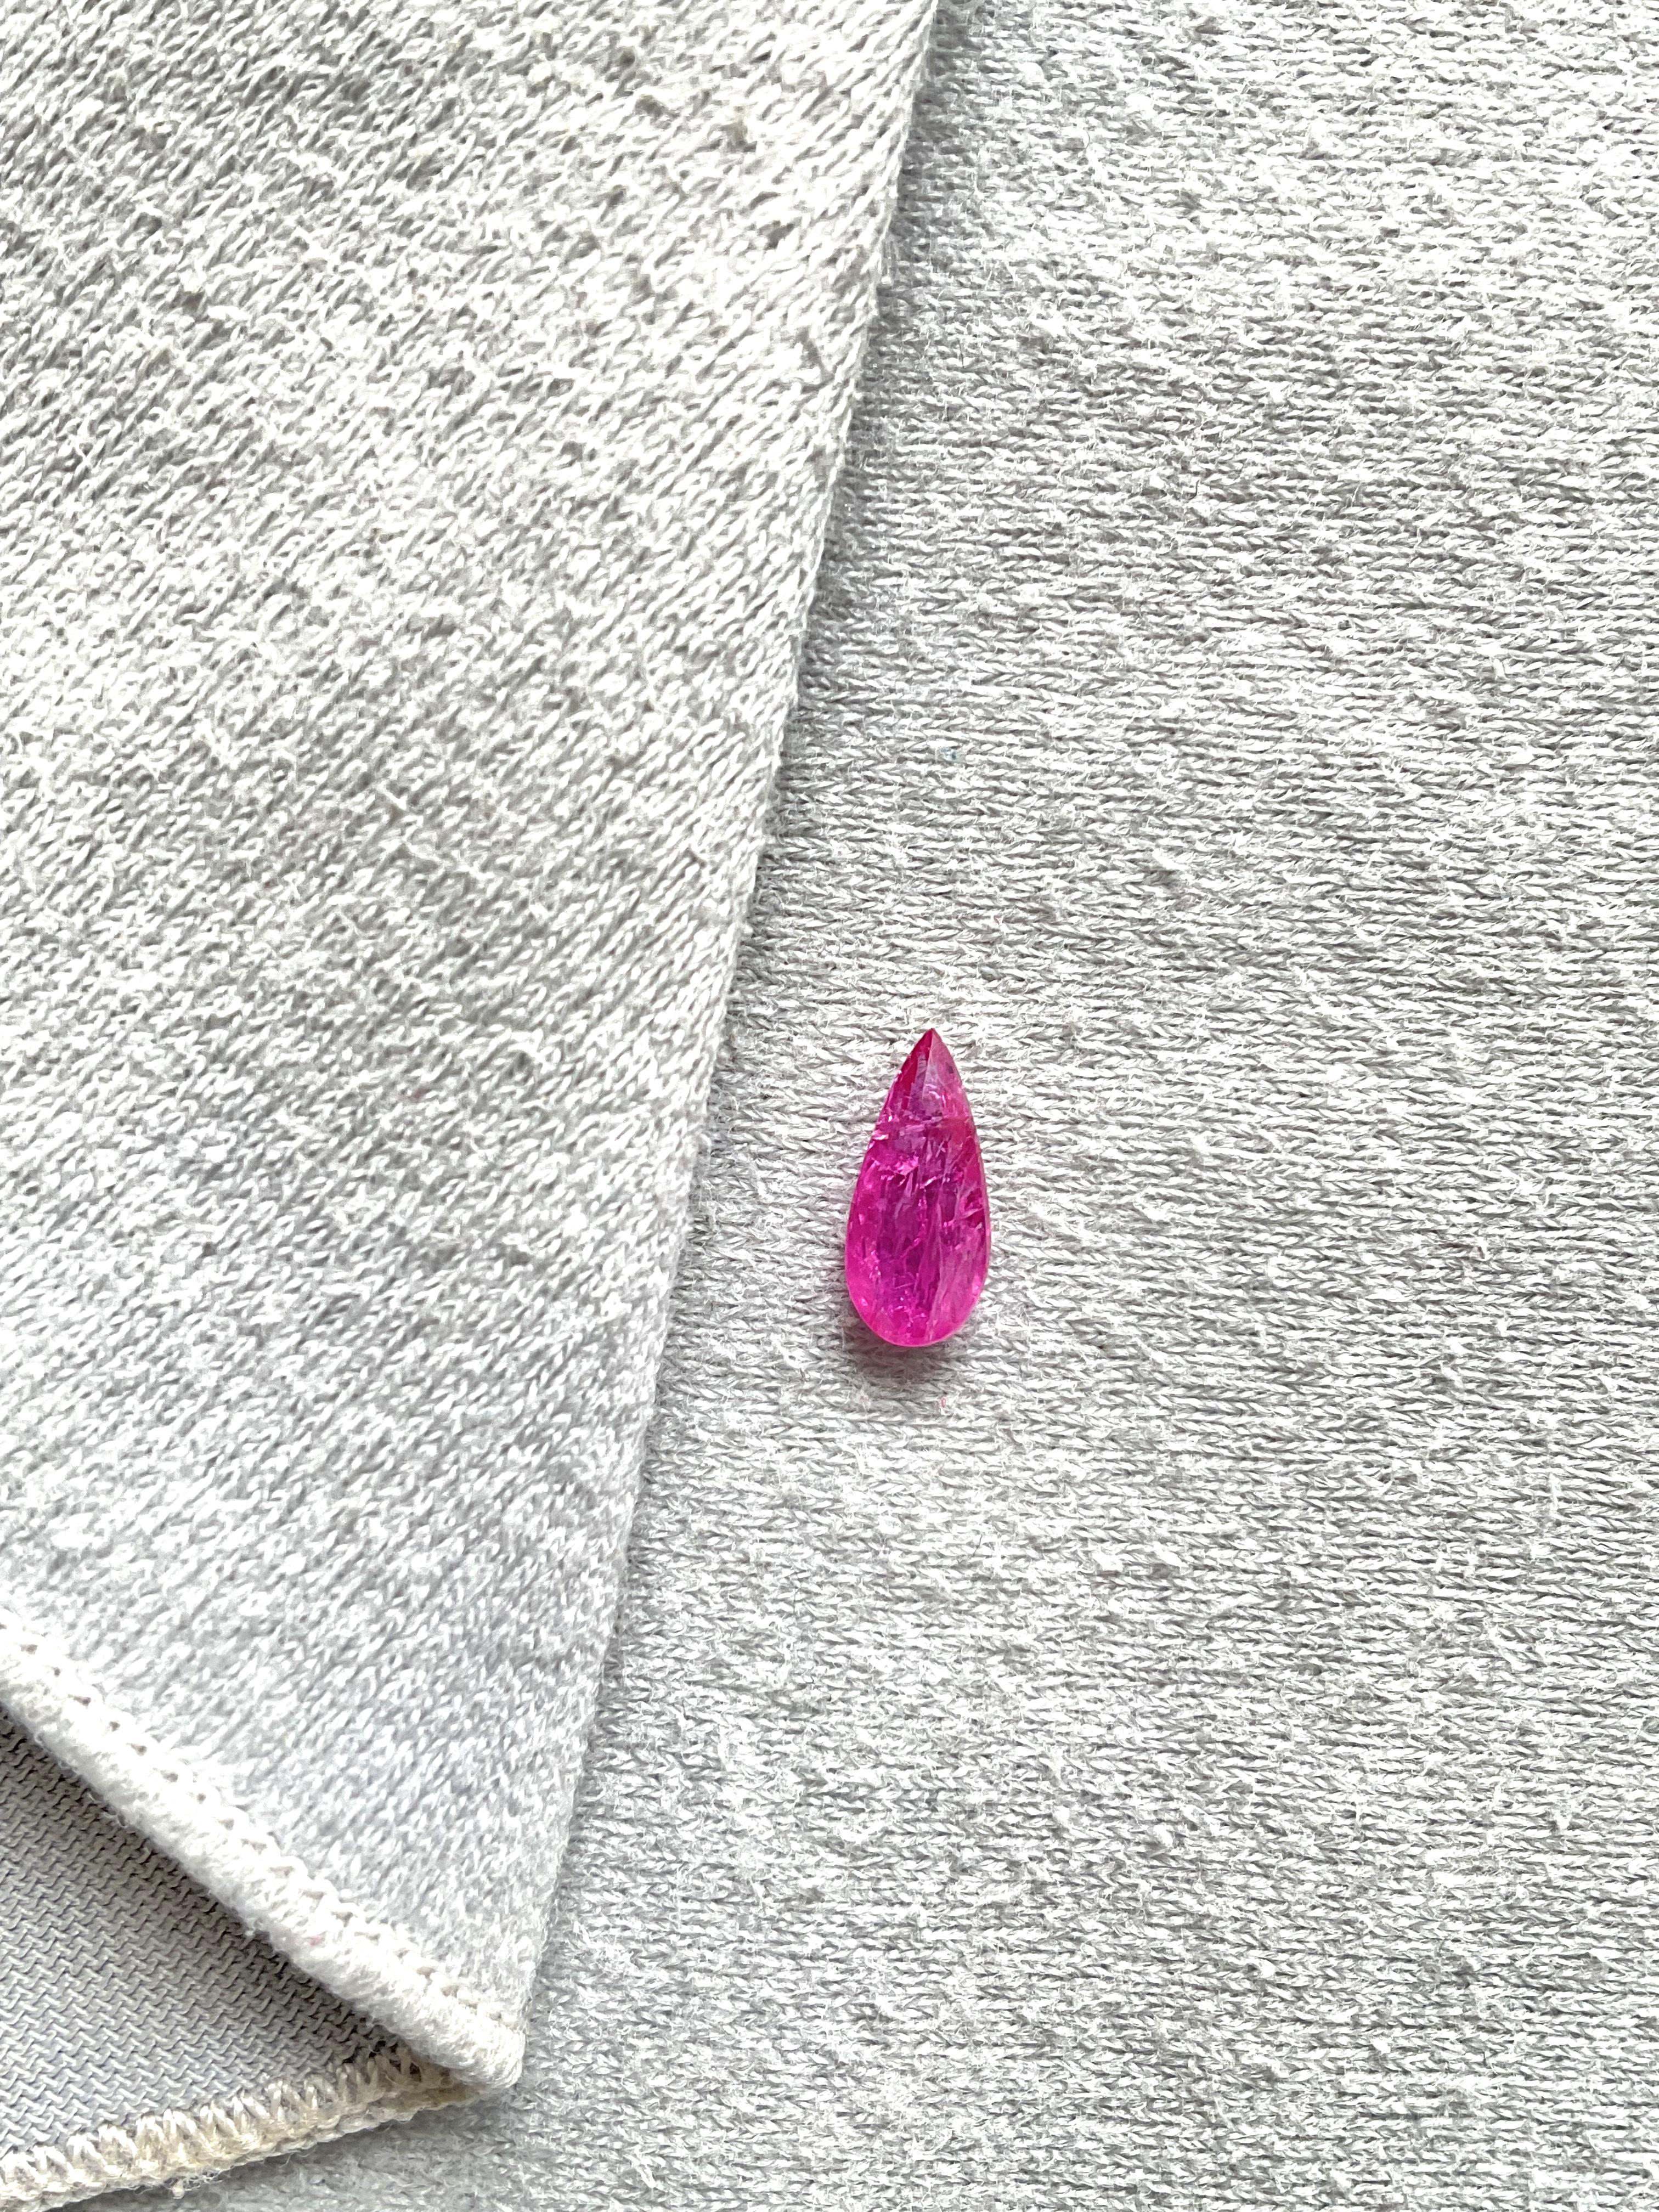 Art Deco Certified 1.48 Carats Mozambique Ruby Pear Faceted Cutstone No Heat Natural Gem For Sale